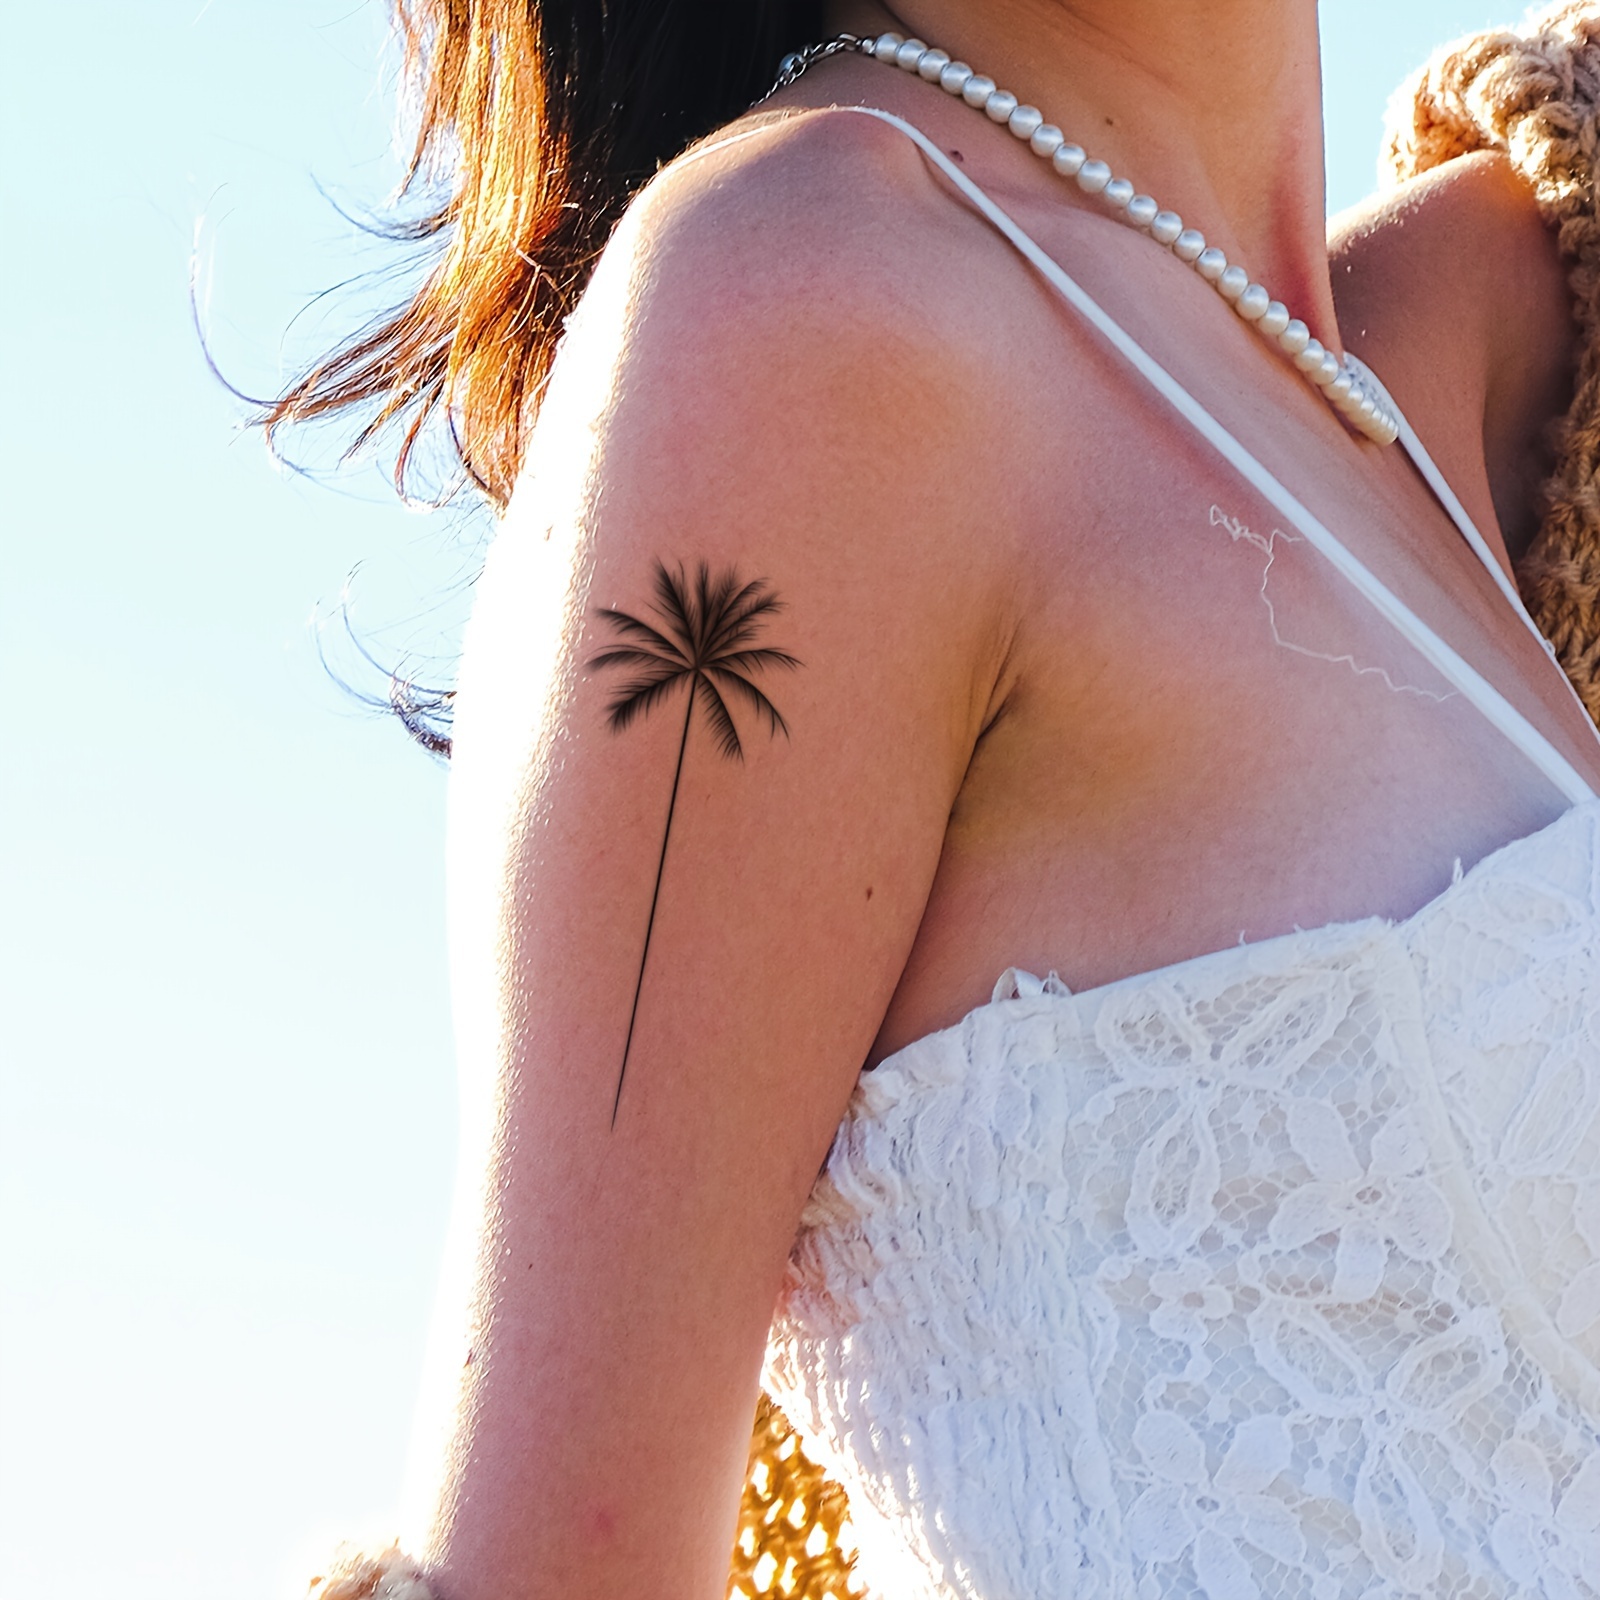 

1pc, Premium Minimalist Palm Tree Temporary Tattoo Sticker, Waterproof And Sweat-resistant, Beach-inspired Body Art, Lasts 1-3 Days, Easy Application For All Skin Types